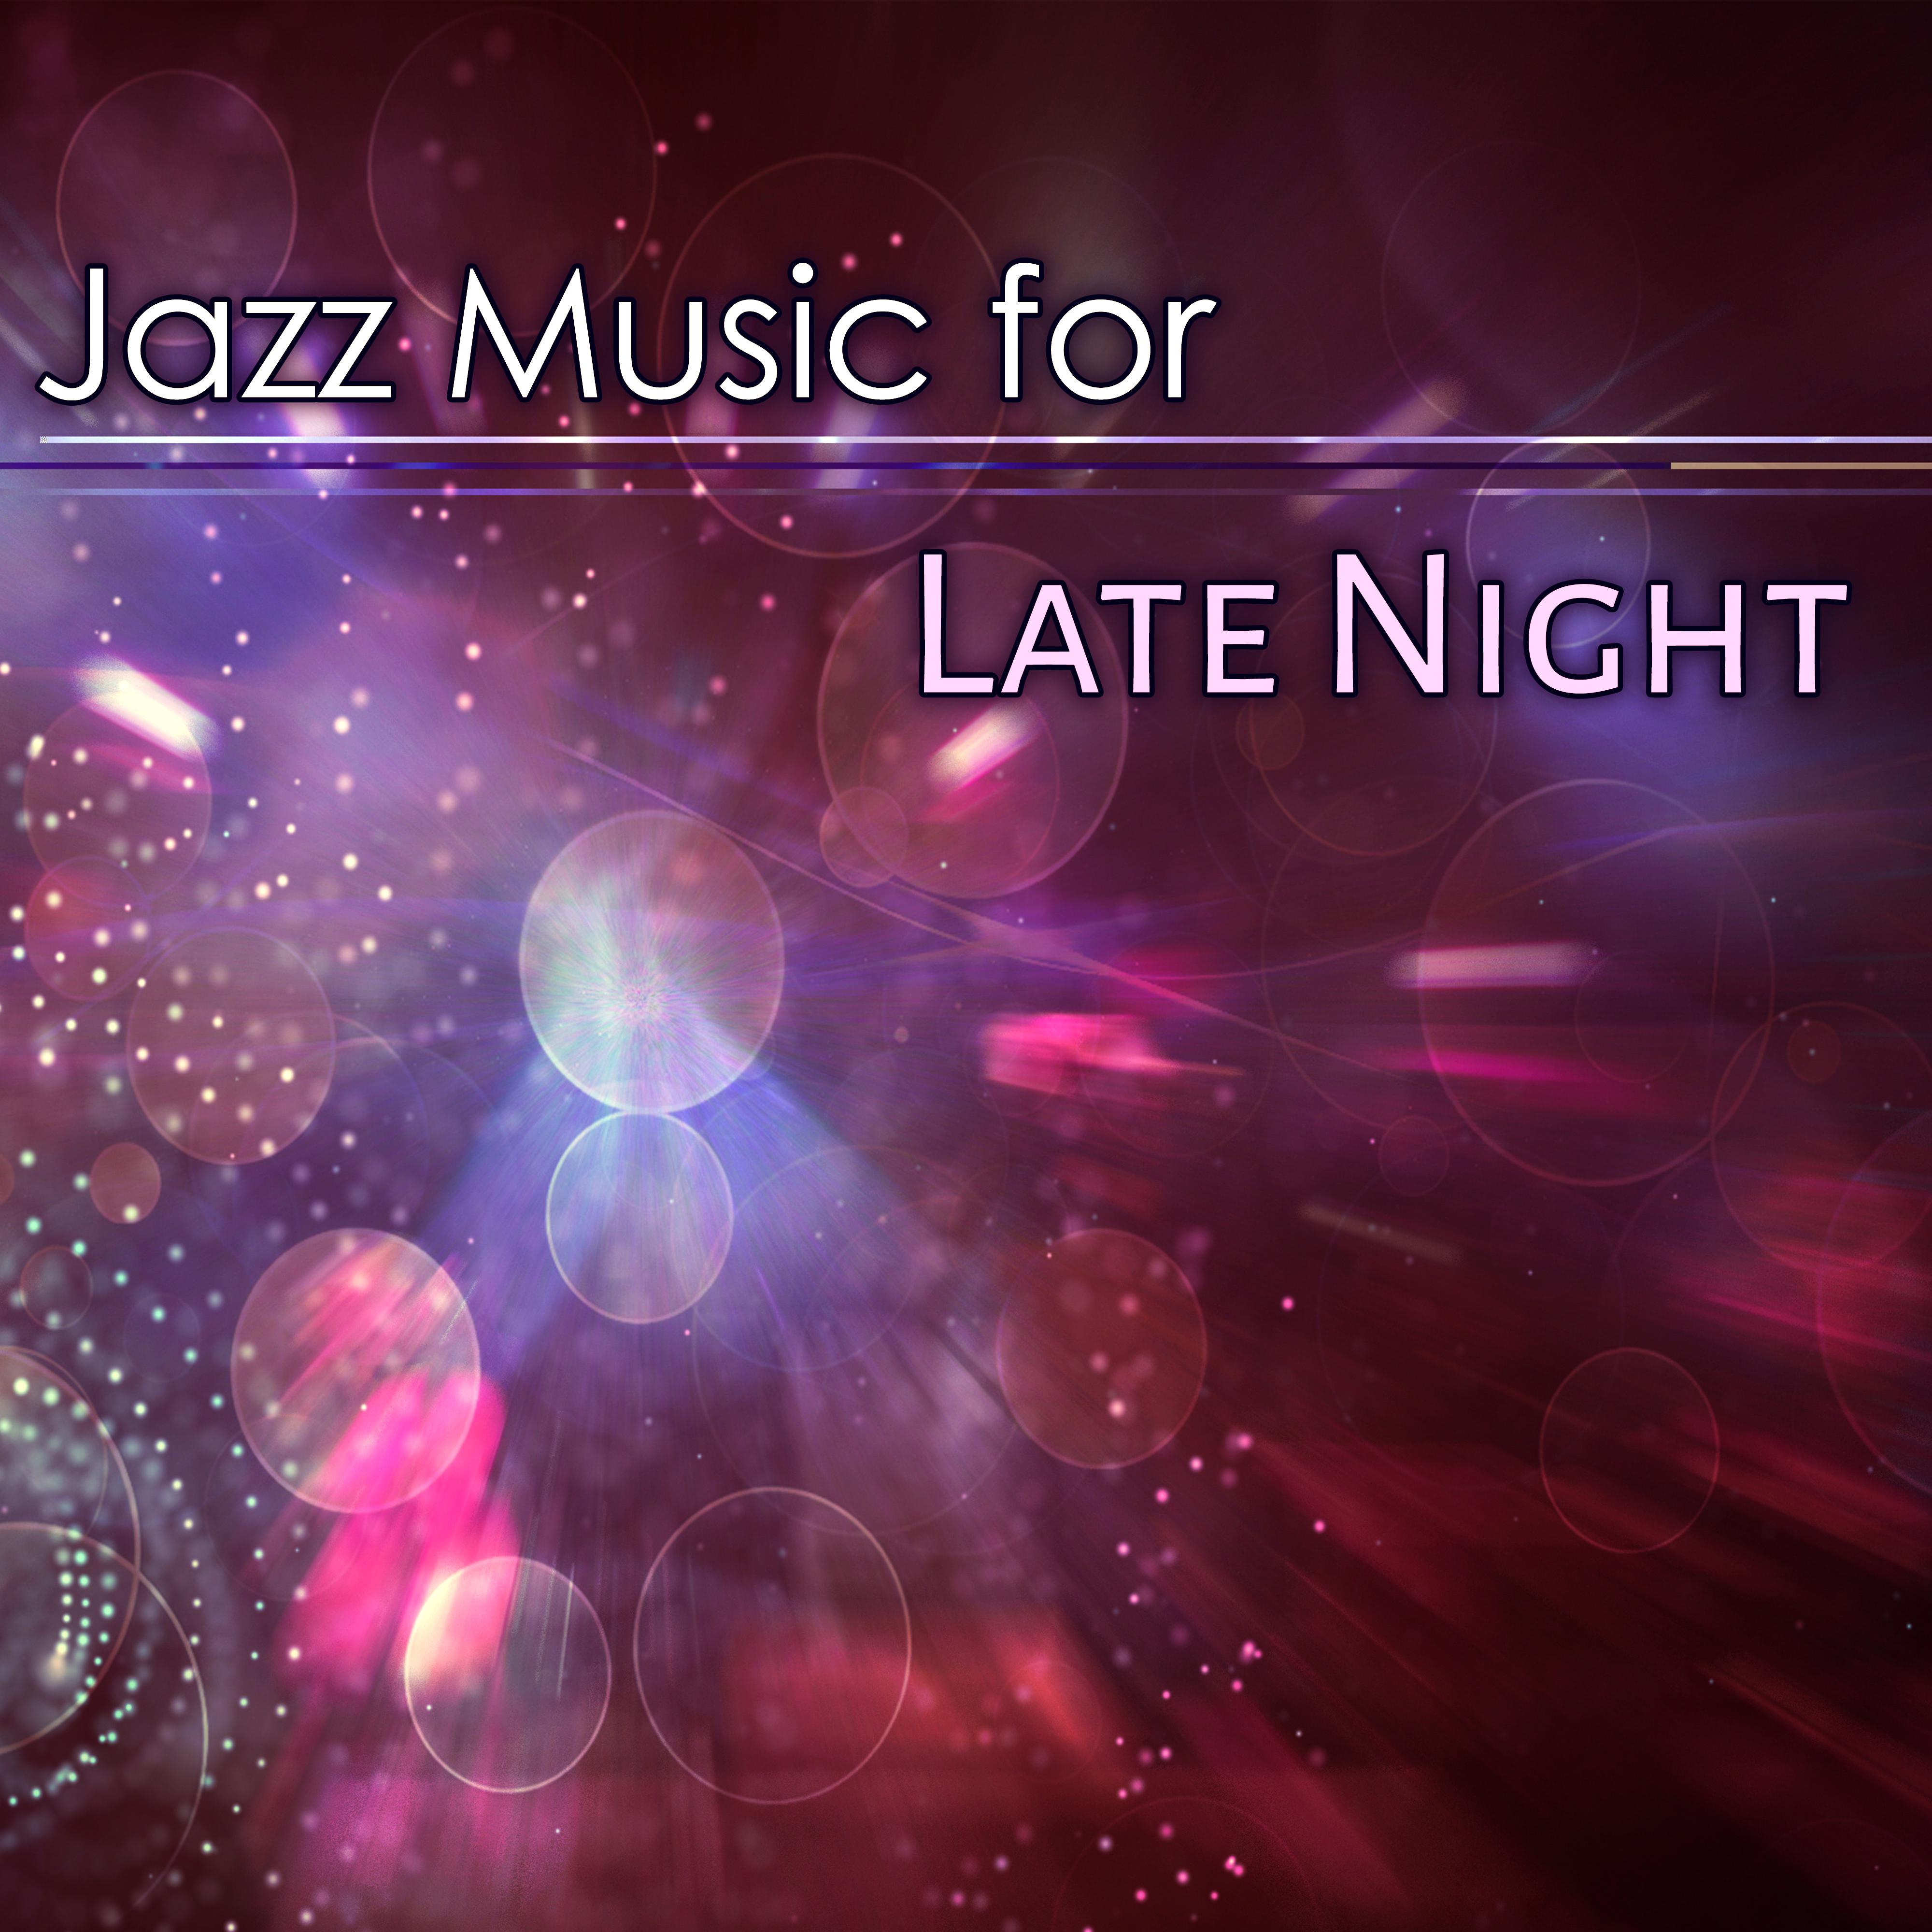 Jazz Music for Late Night  Shades of Jazz, Calming Piano Note, Relaxing Sounds, Music to Rest